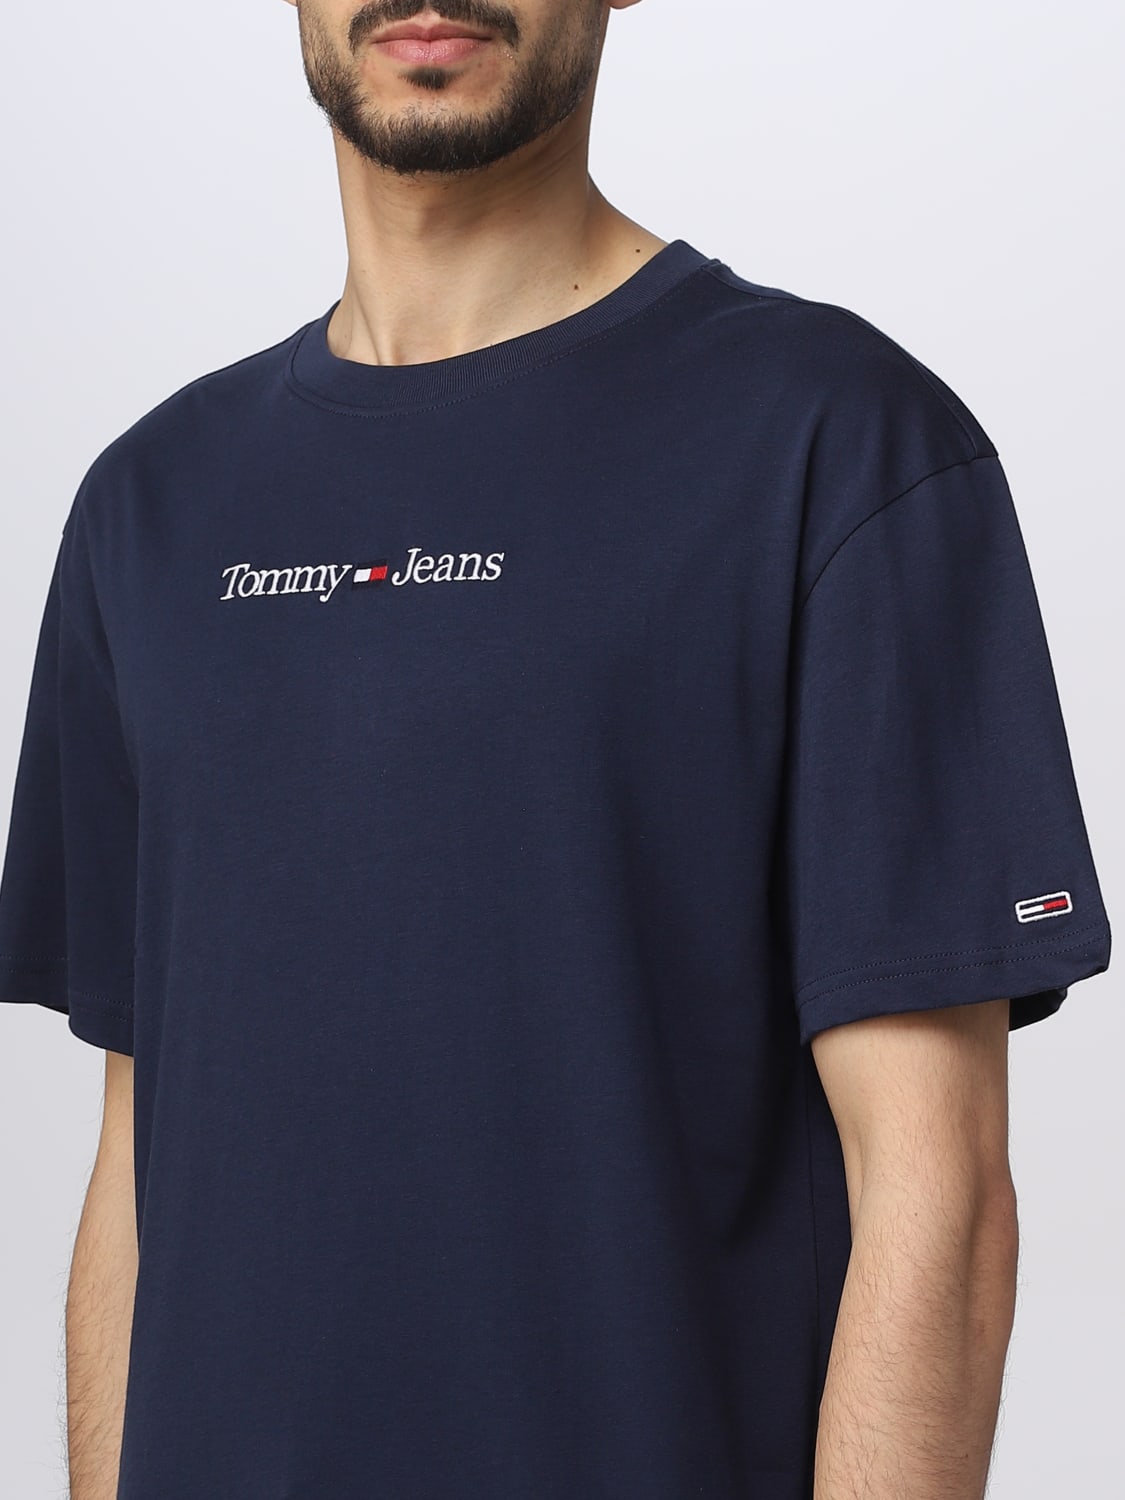 TOMMY JEANS: t-shirt for man - Navy | Tommy Jeans t-shirt DM0DM14984 on GIGLIO.COM